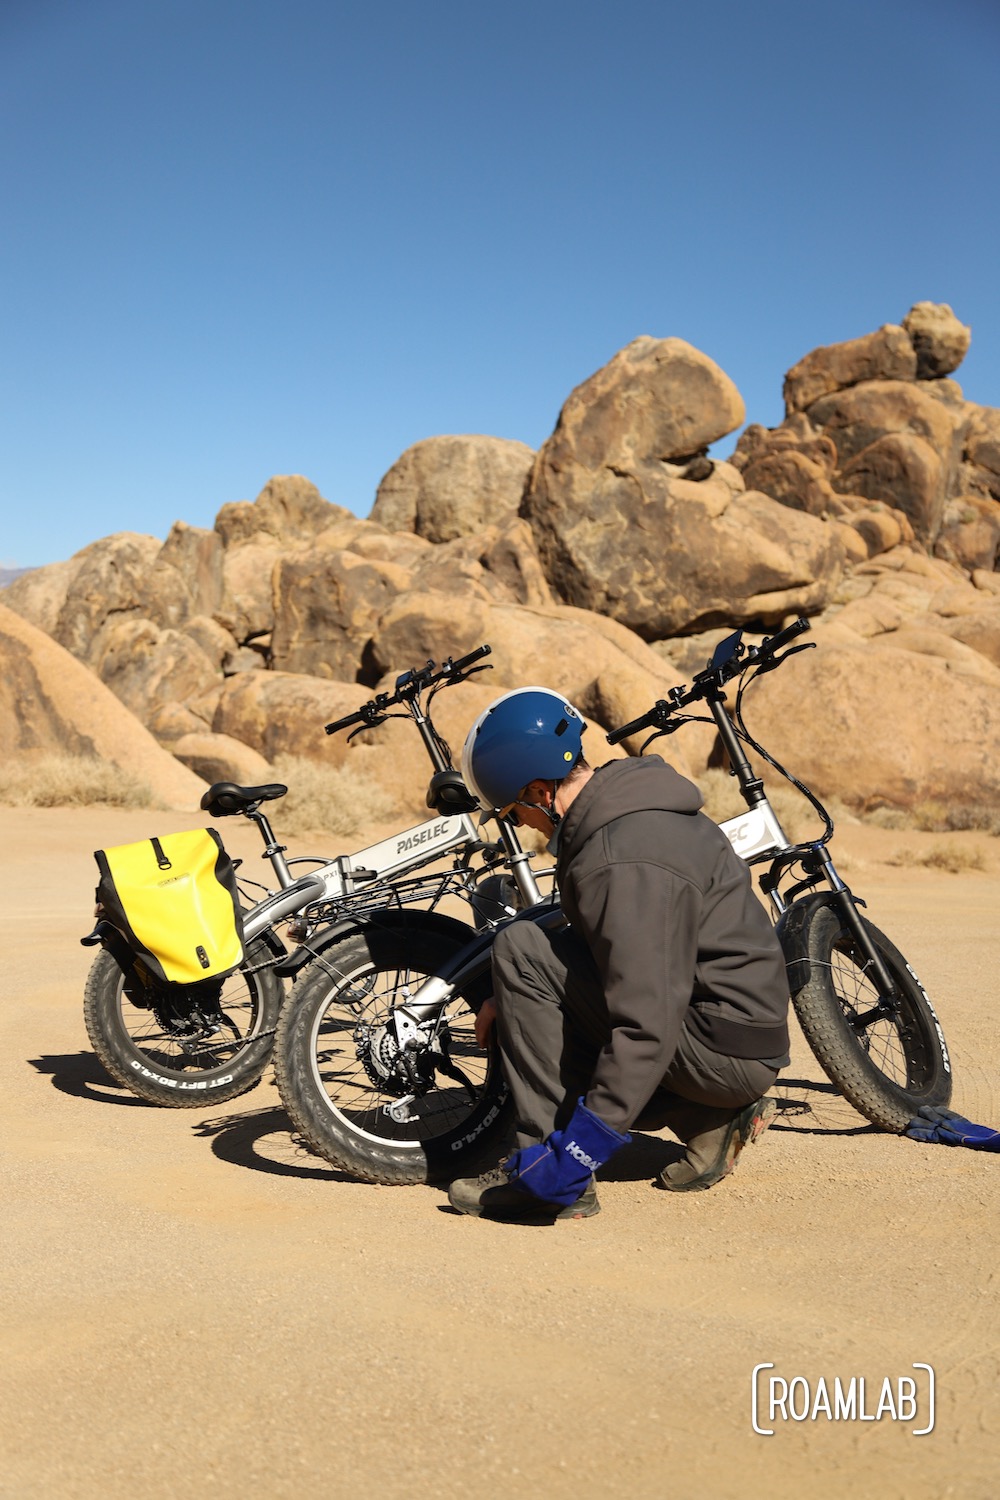 Man crouching next to bikes, looking at the tires, with golden boulders and a clear blue sky.